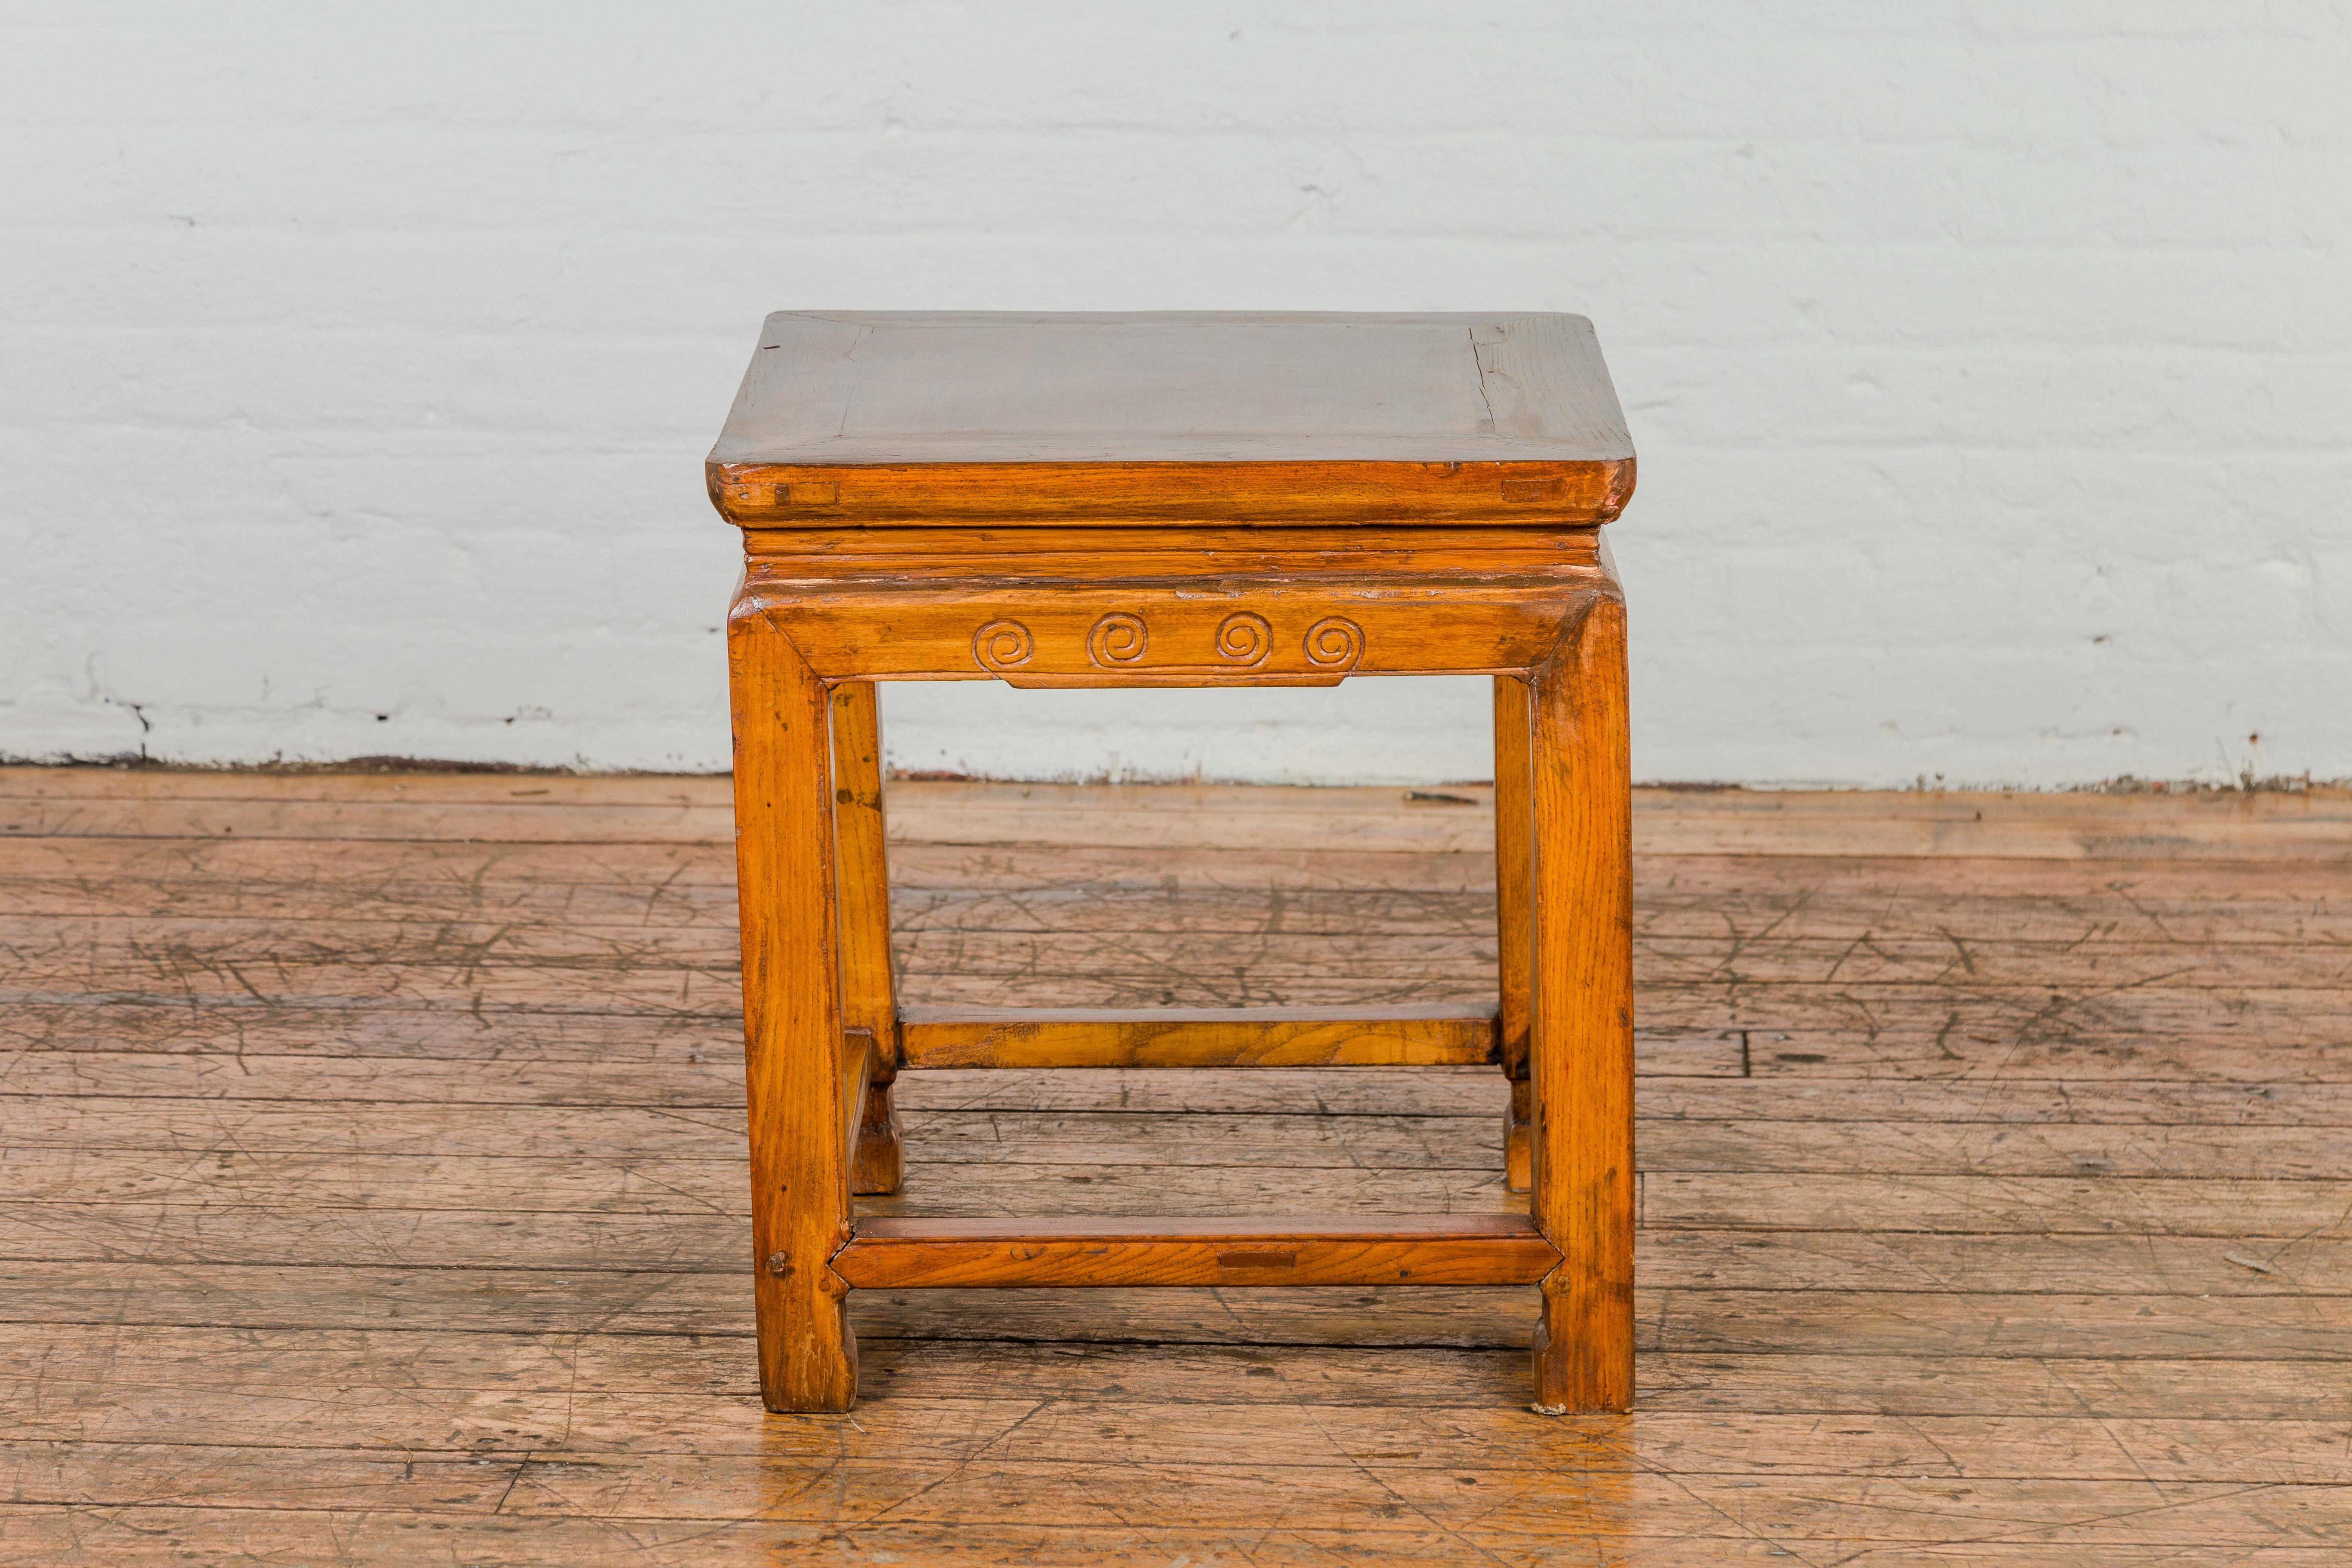 Chinese Elm Qing Dynasty Period Side Table with Horse Hoof Legs and Stretchers In Good Condition For Sale In Yonkers, NY